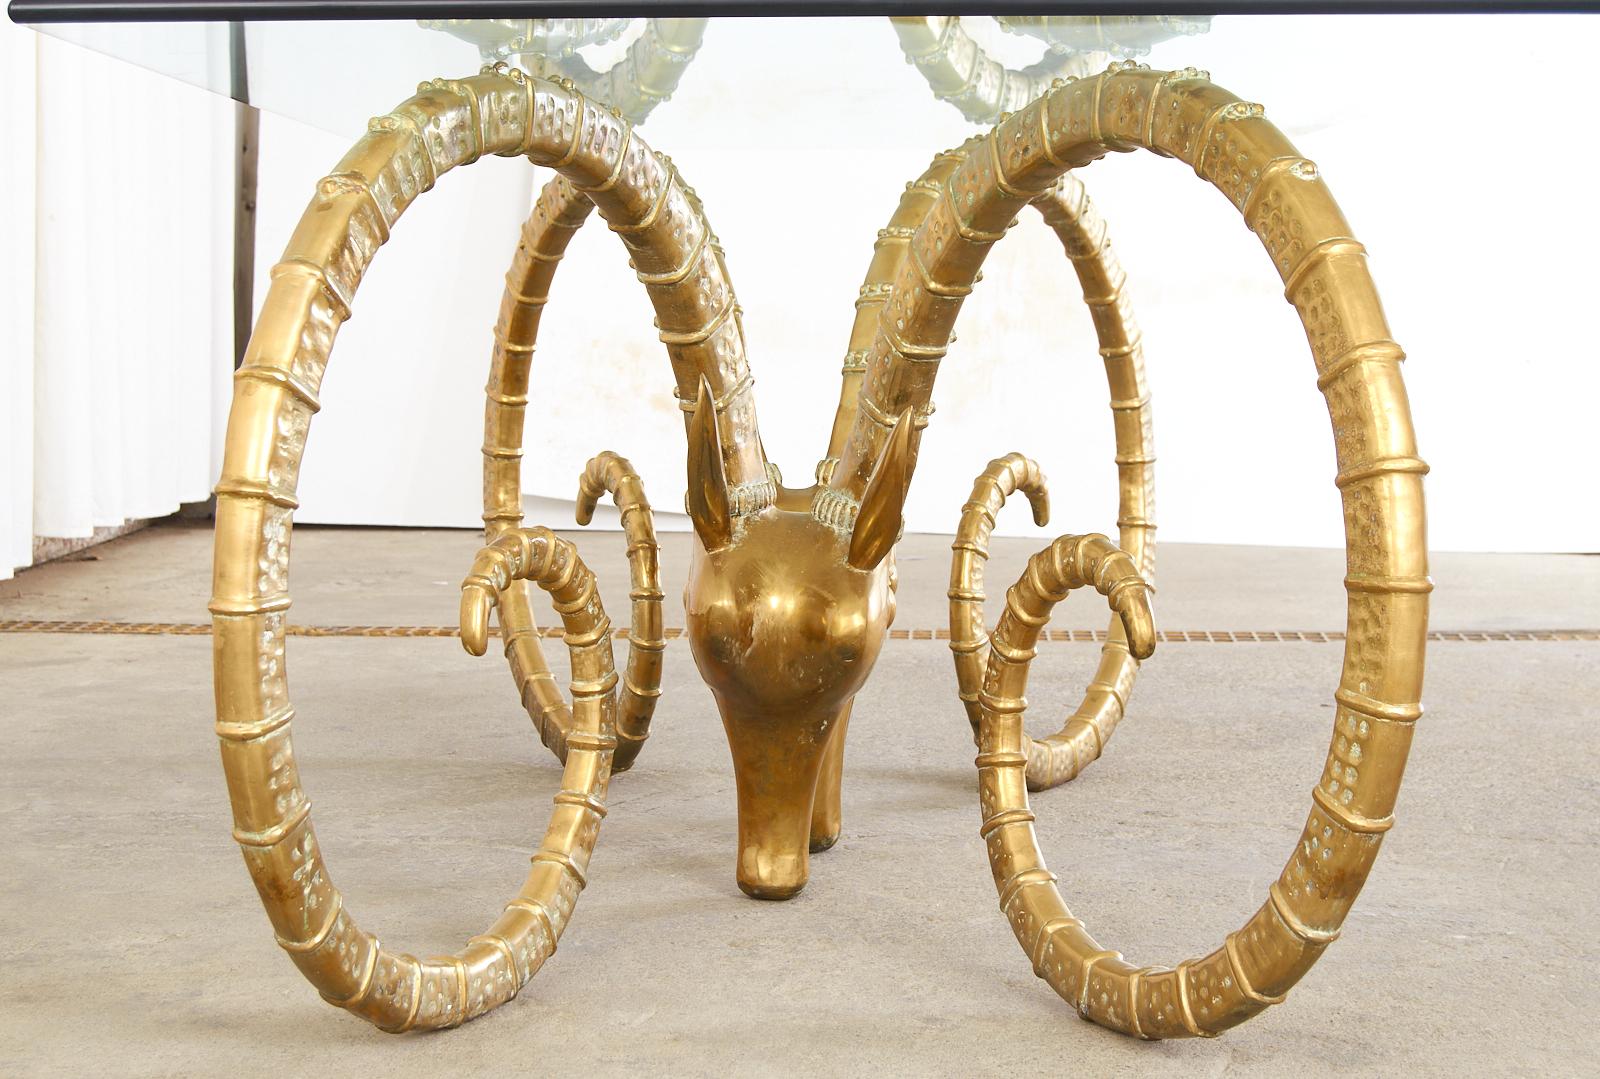 Hand-Crafted Brass Rams Head Ibex Dining Table Atrributed to Alain Chervet